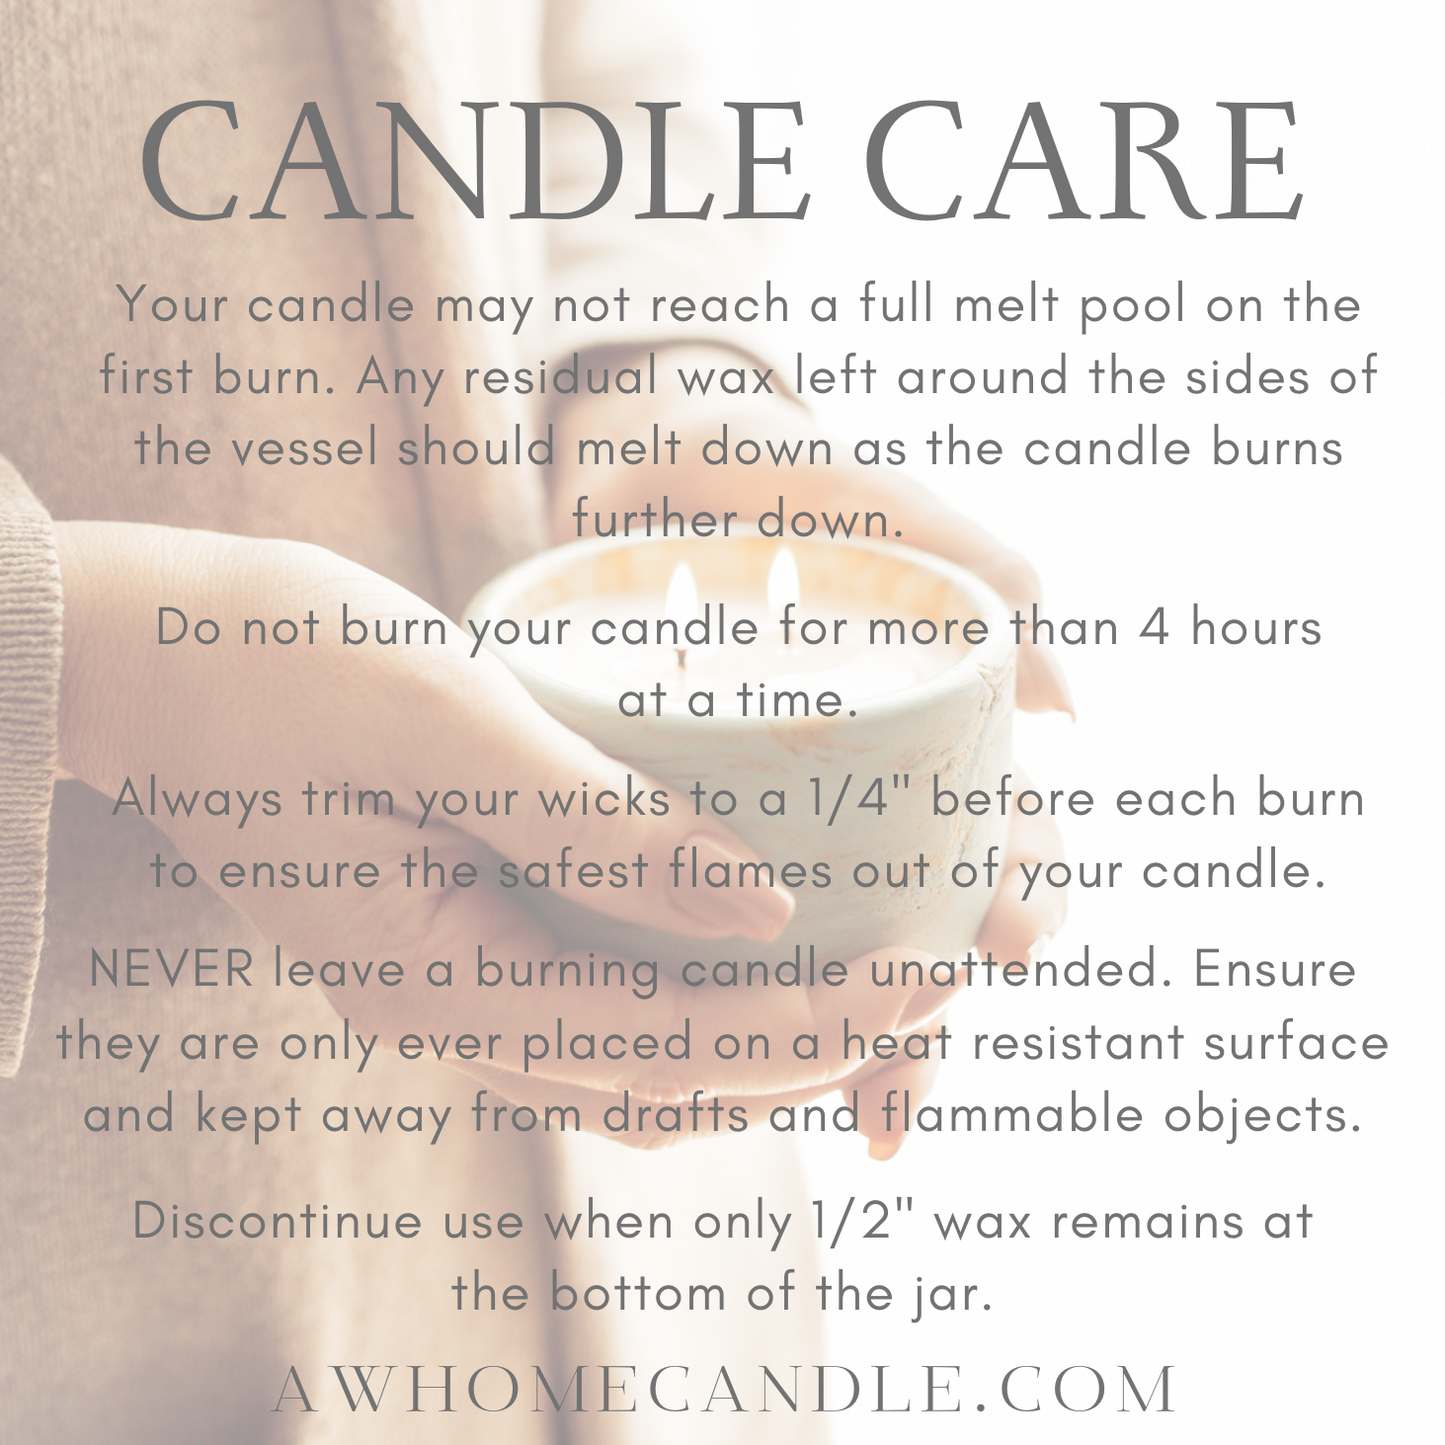 HOTEL LOBBY Concrete Candle | Coconut wax | Luxury Candle